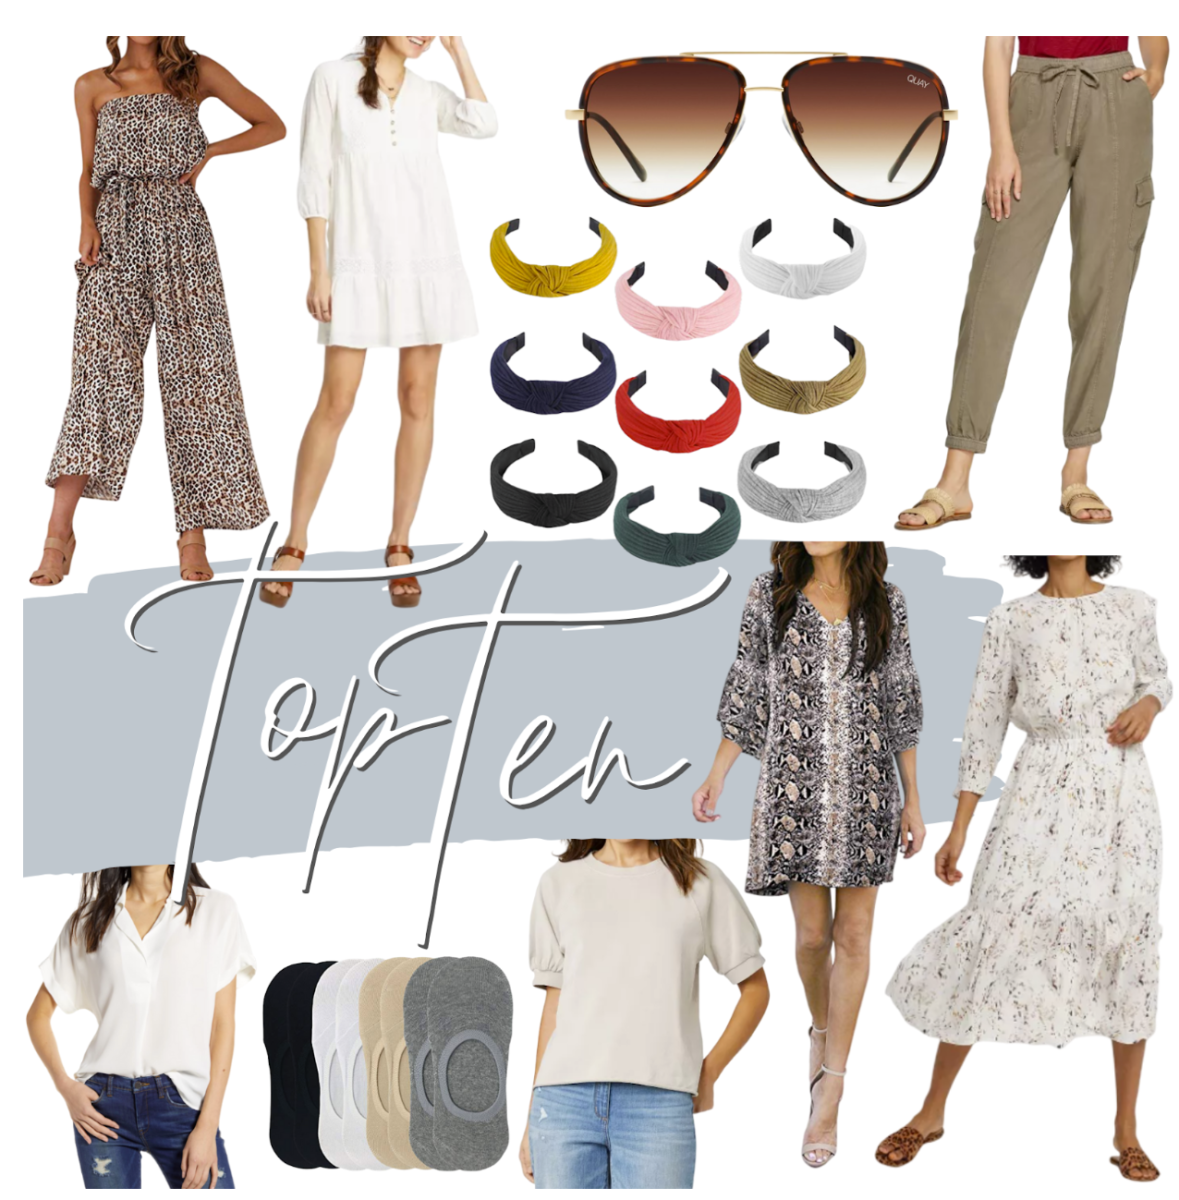 Early Spring Best Sellers | Spring Clothing by popular Houston fashion blog, Haute and Humid: collage image of knot headbands, dresses, no-show socks, Quay sunglasses, blouses, and cargo pants. 